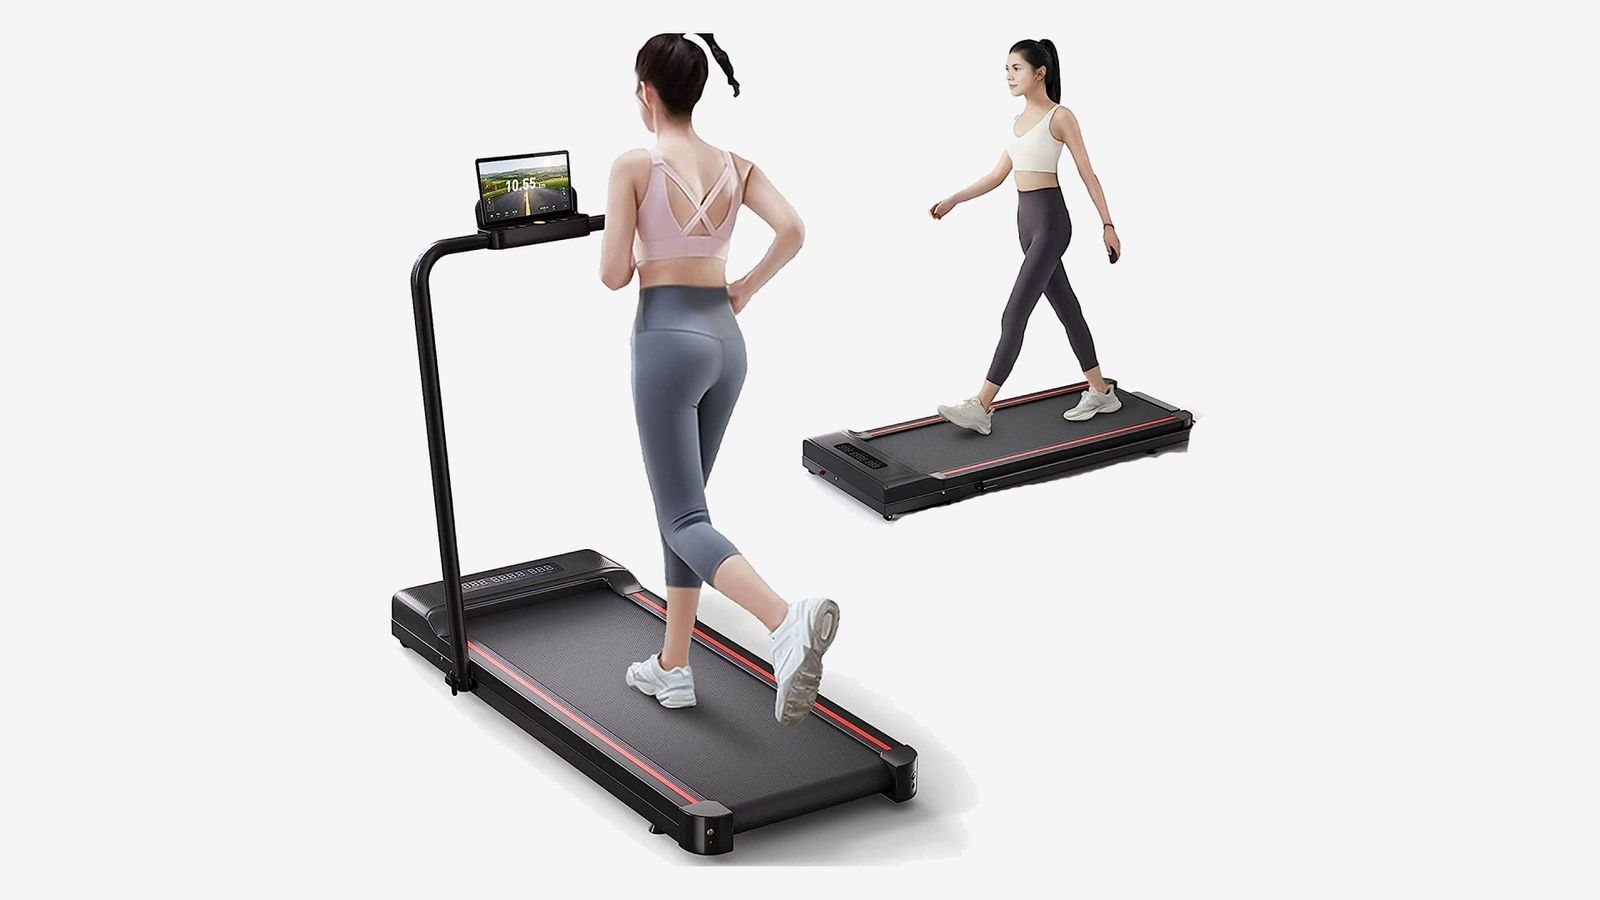 Sperax 2-In-1 Treadmill product image of a someone in a pink top and grey leggings using a black treadmill with a tablet in the holder.